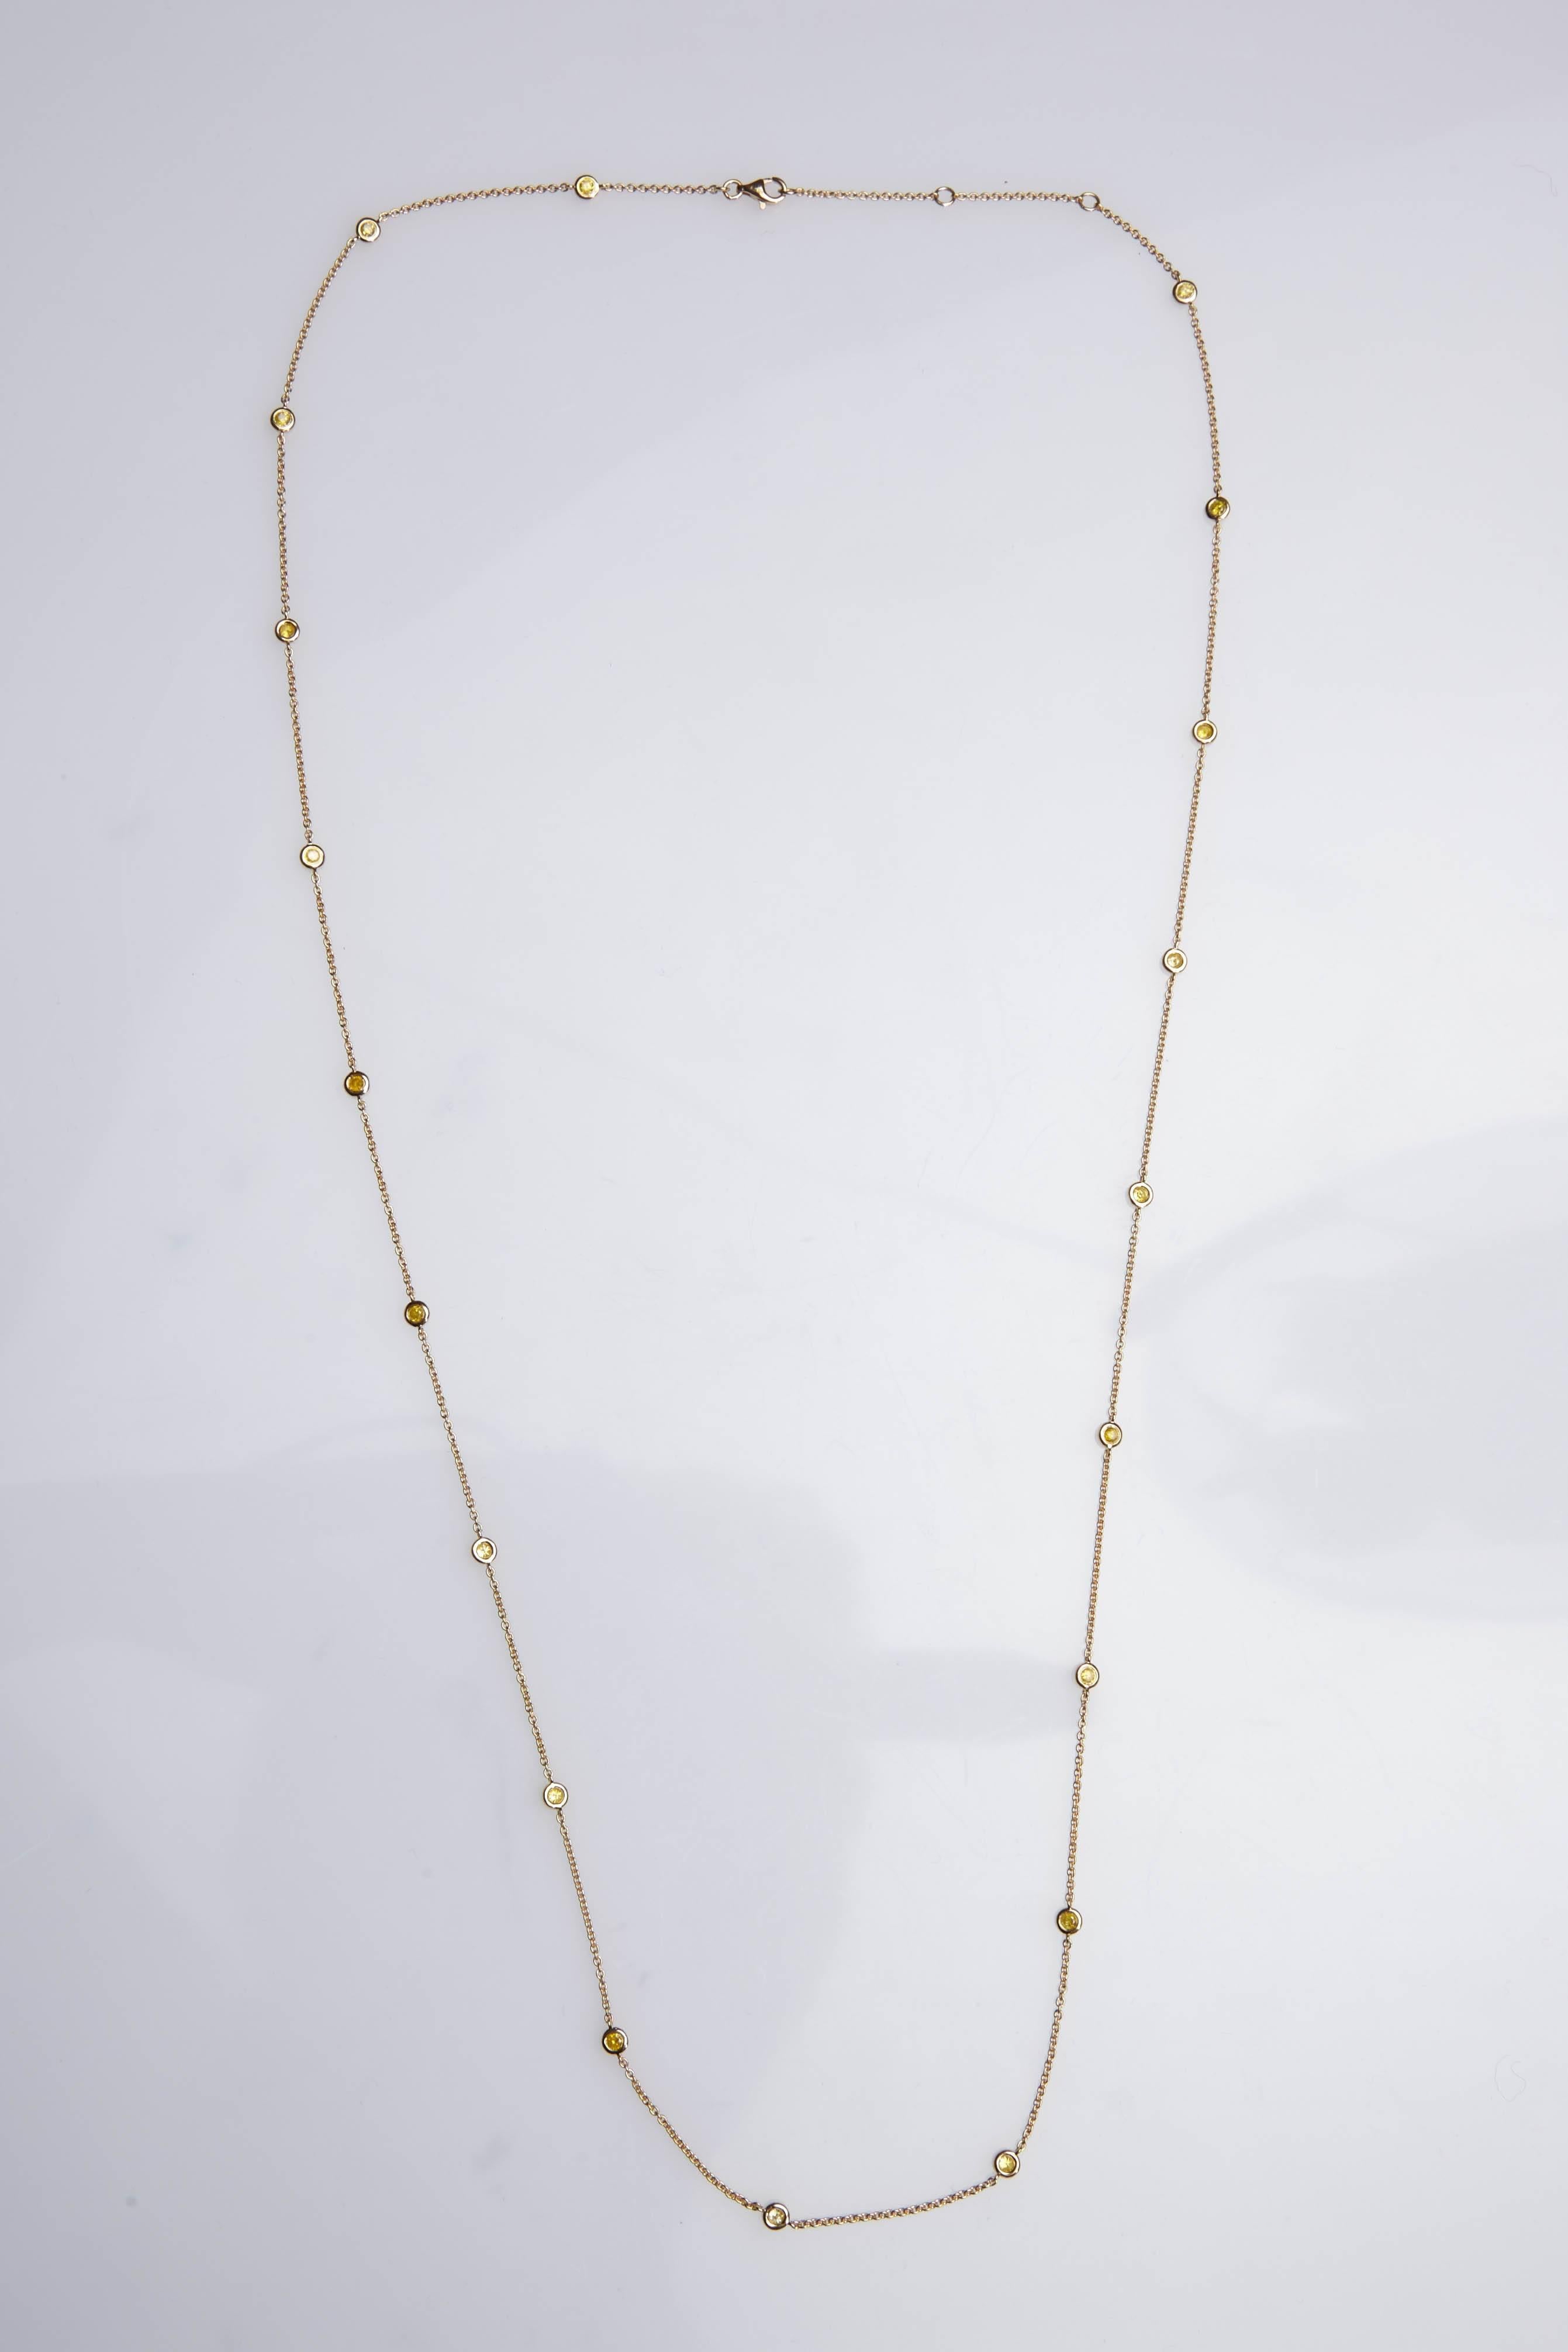 Diamond by the Yard Style Necklace 1.40 Carats in 18 Karat Yellow Gold  For Sale 1